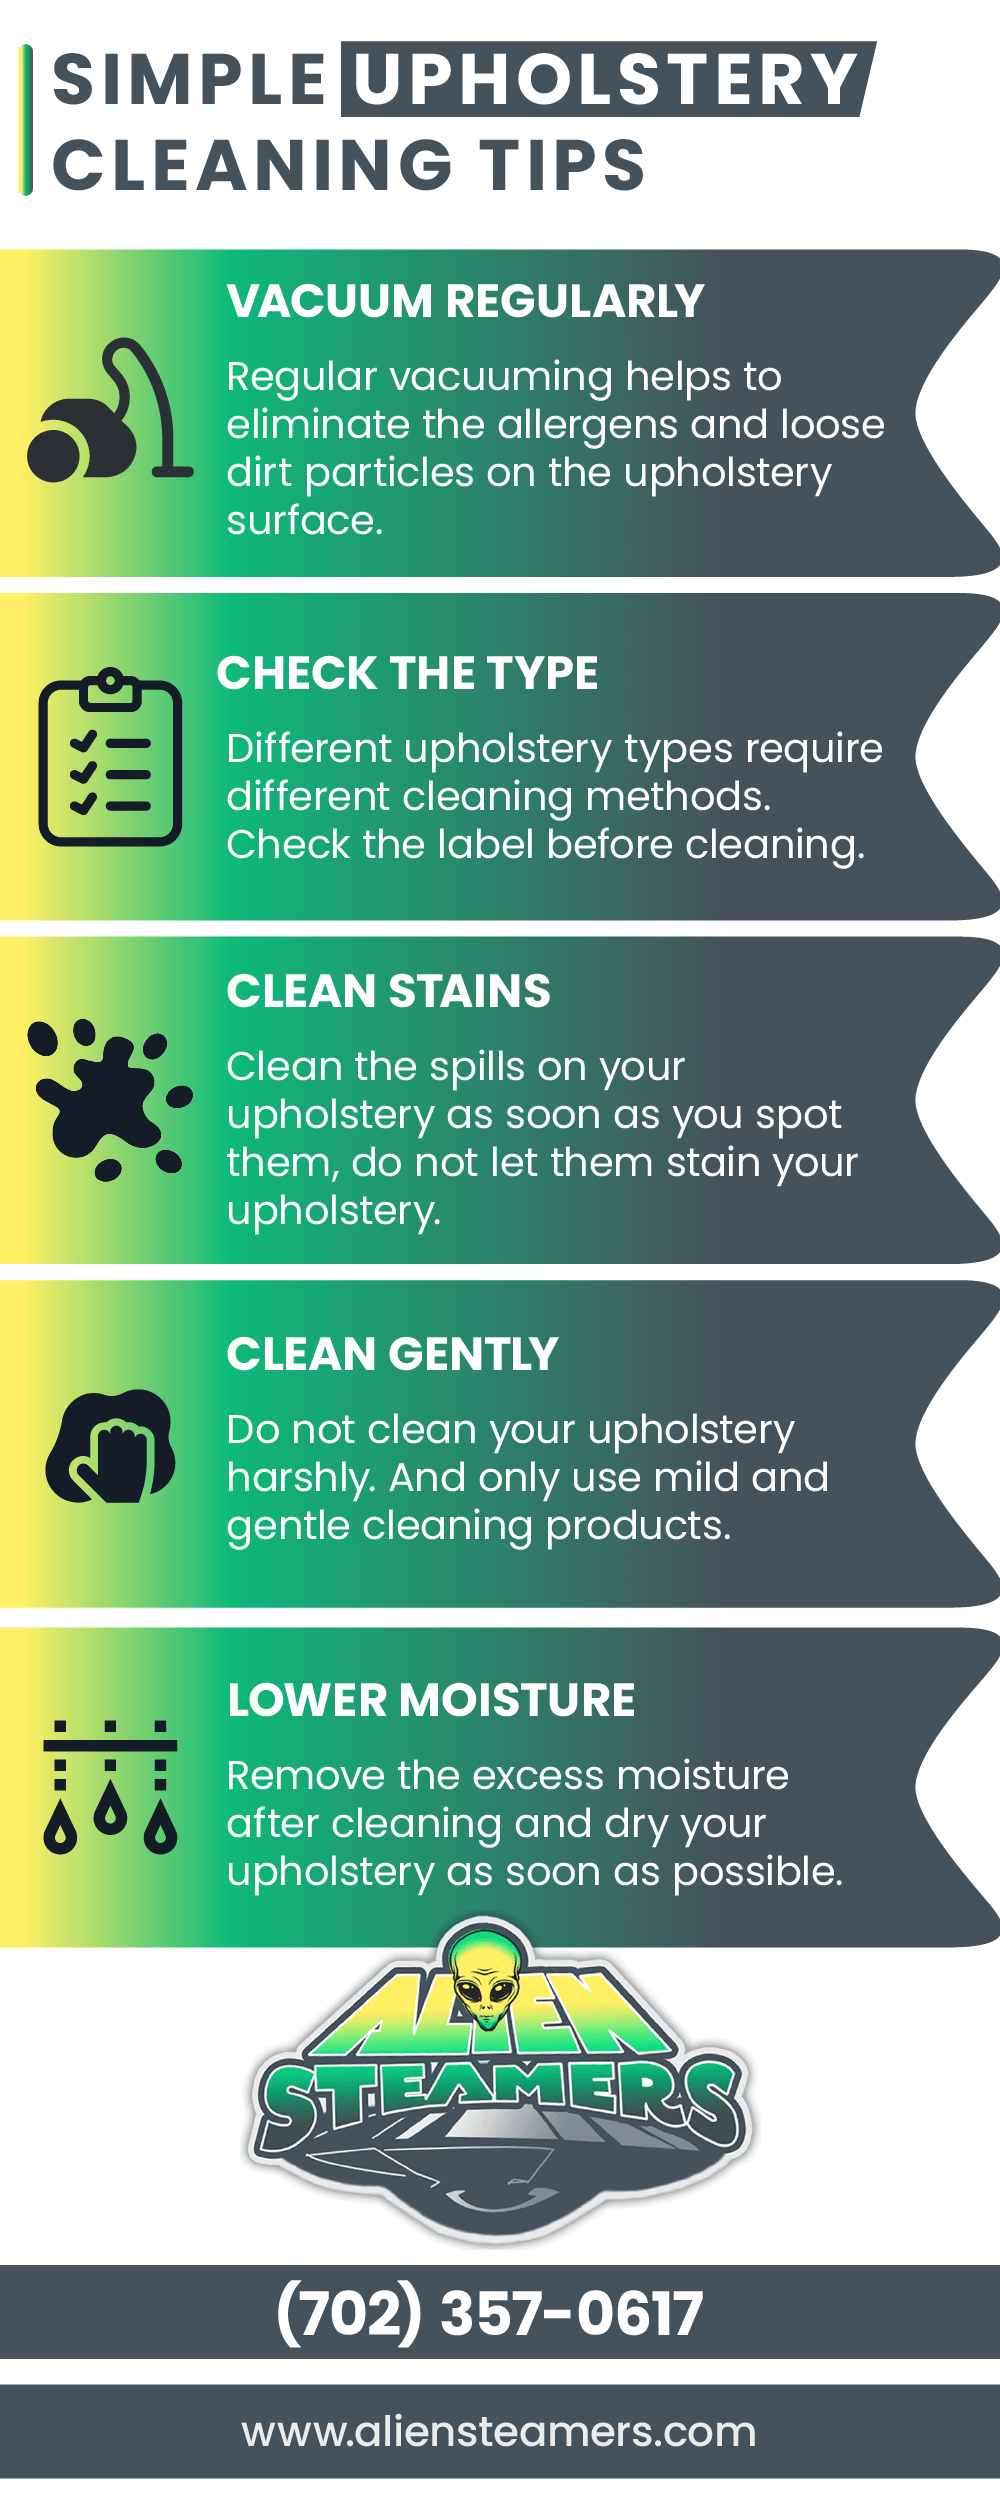 Simple Upholstery Cleaning Tips